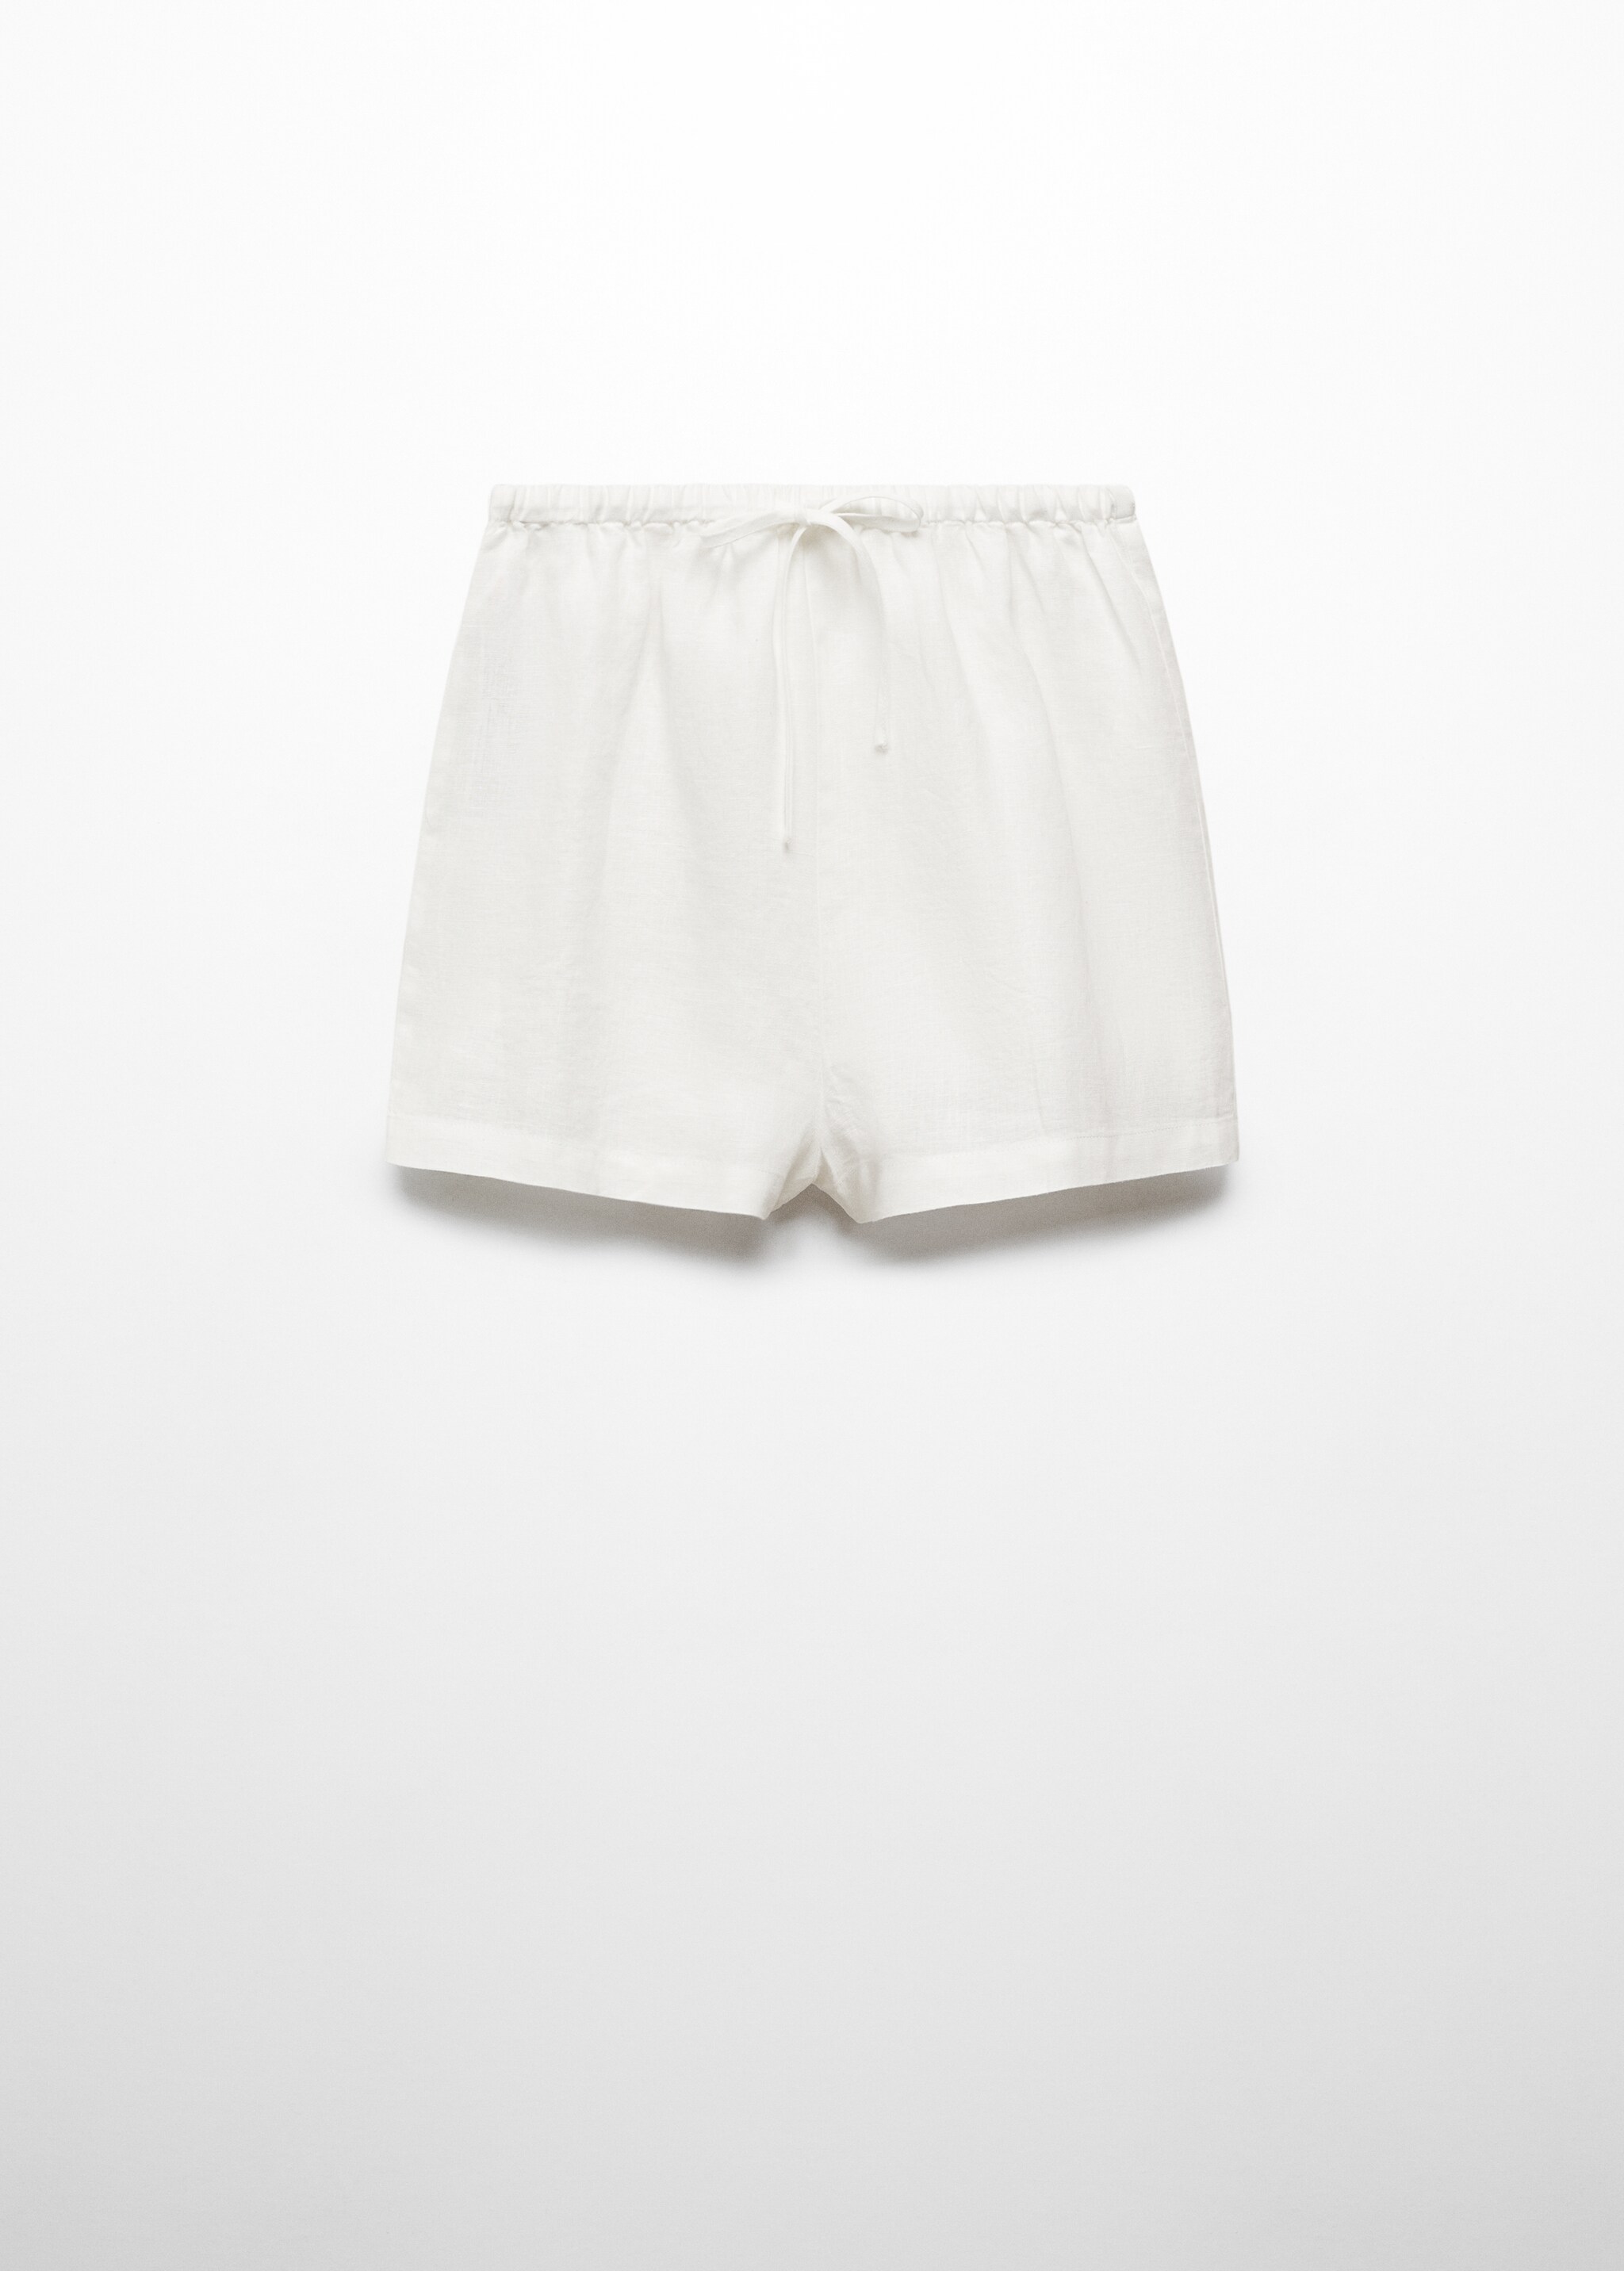 Linen pajama shorts - Article without model